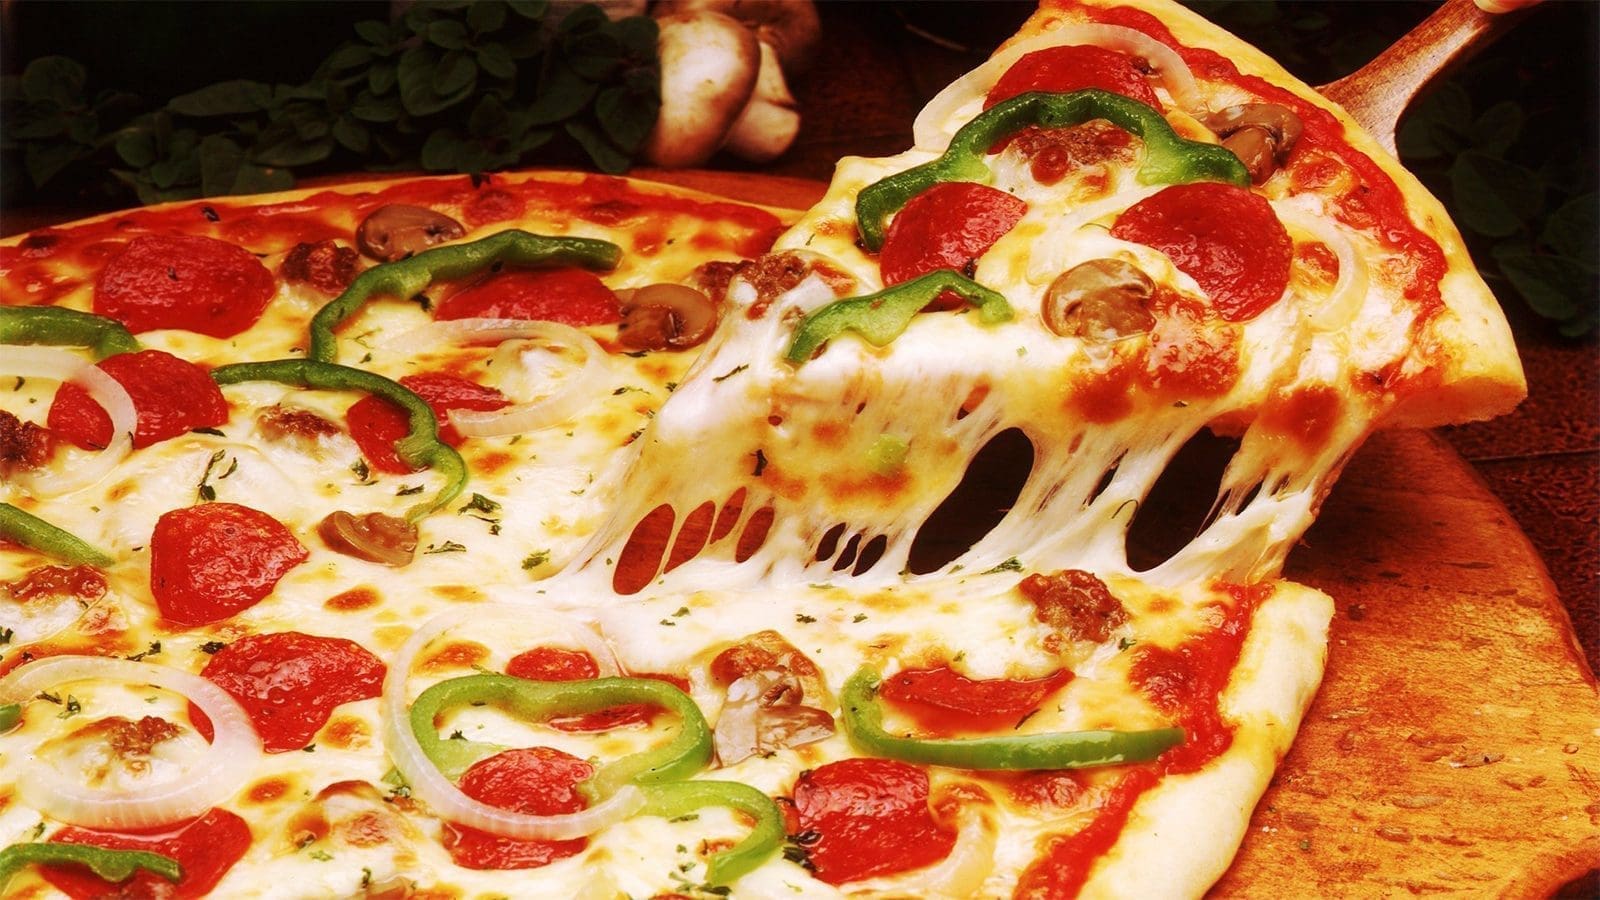 French authorities link Nestle’s Buitoni brand Fraîch’Up pizza to E.coli infections